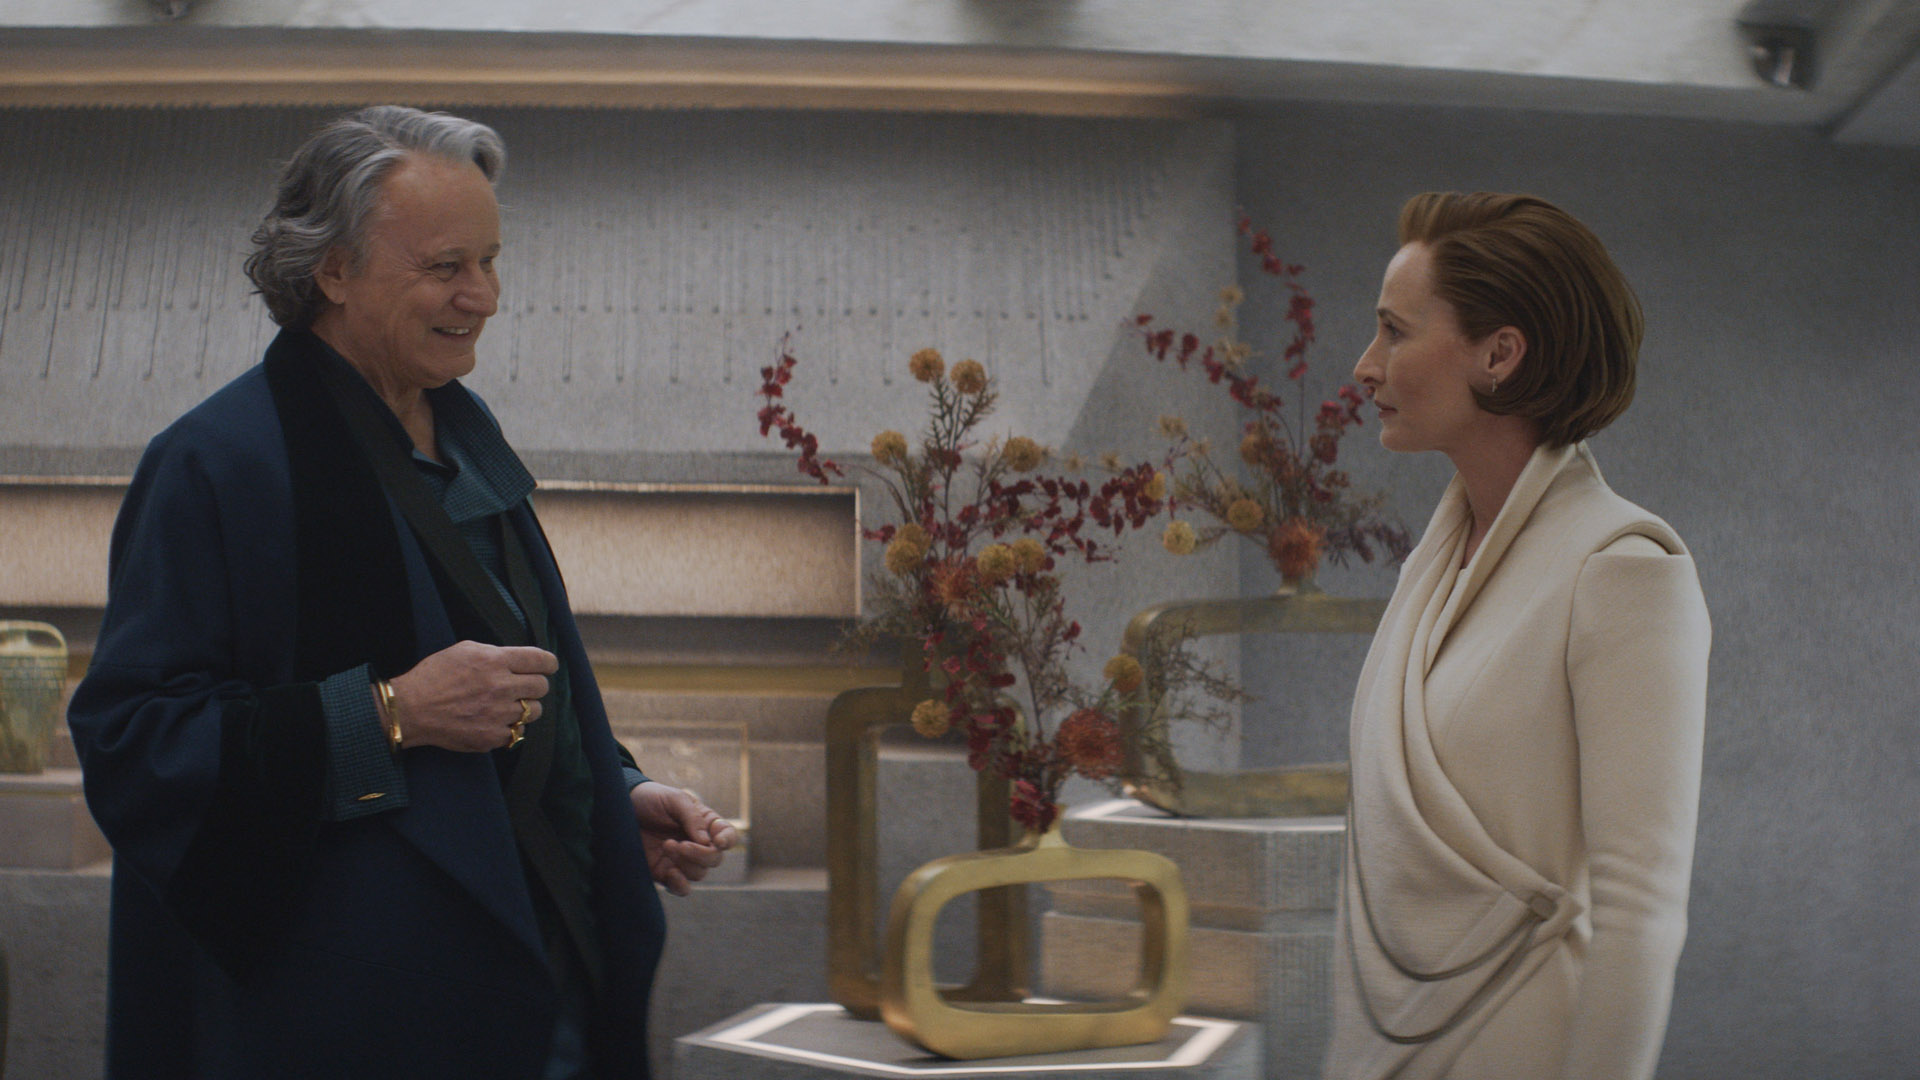 Luthen Rael and Mon Mothma engage in conversation in the former's masquerading store front in Andor's TV show